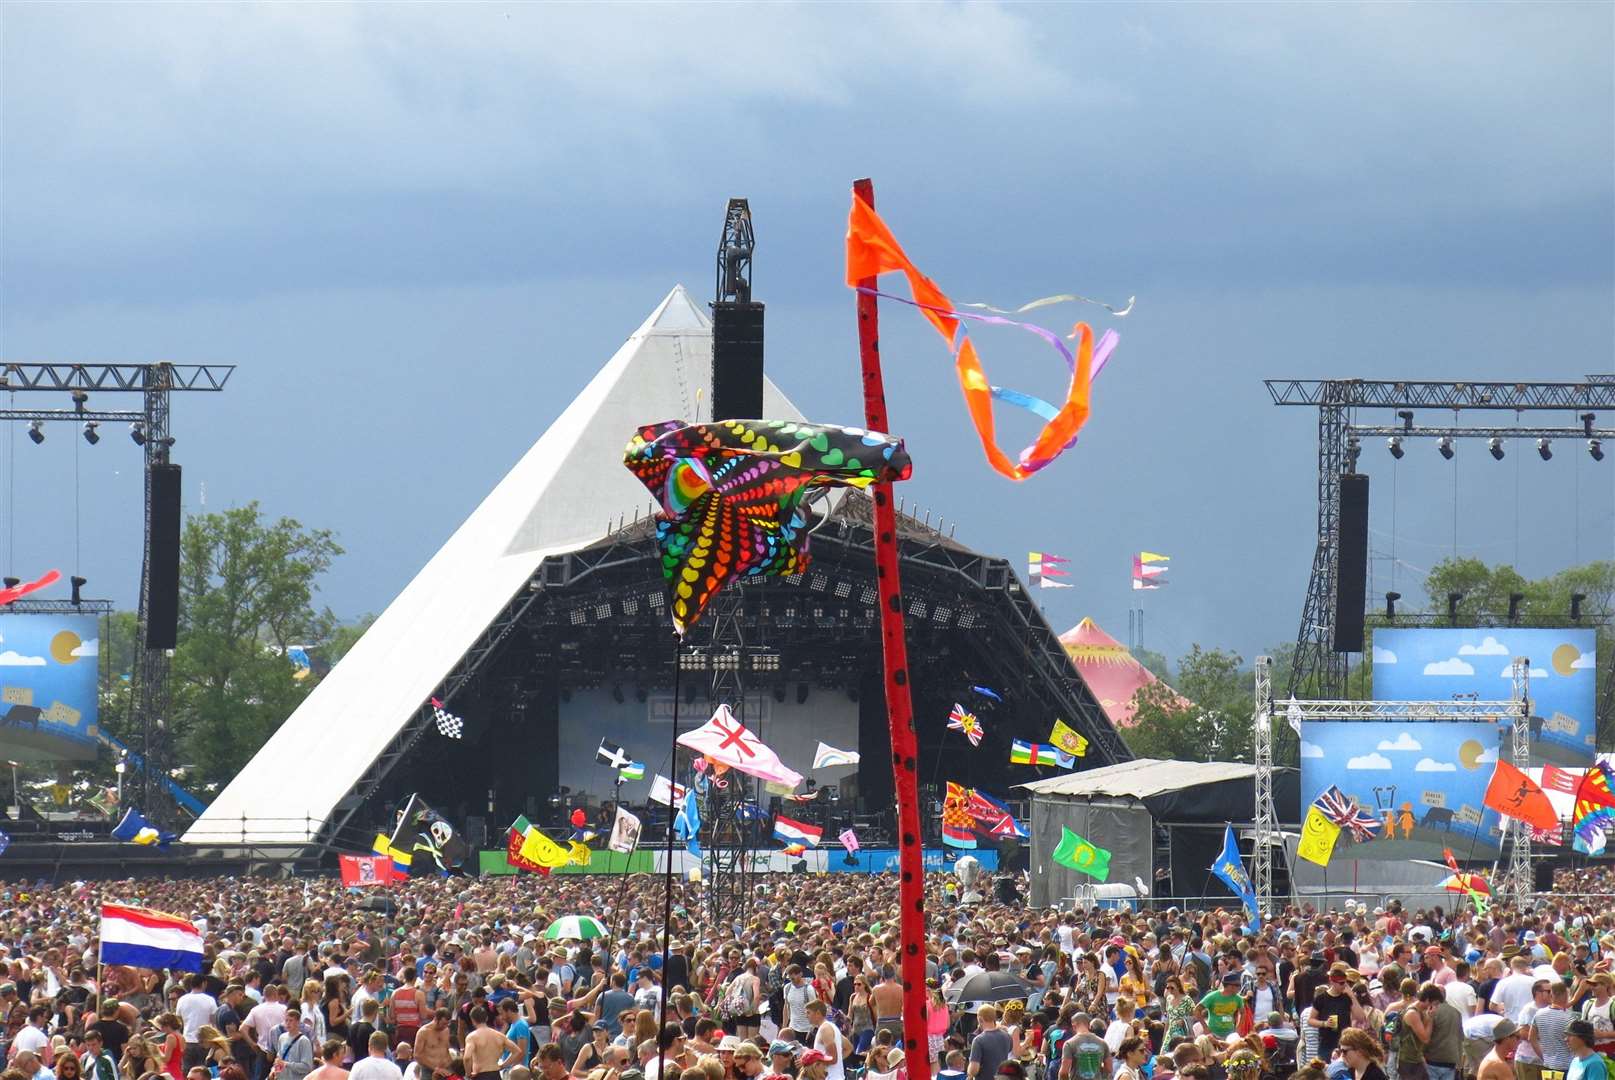 The Glastonbury Festival has changed massively over the years - both in scale of the crowds and number of flags